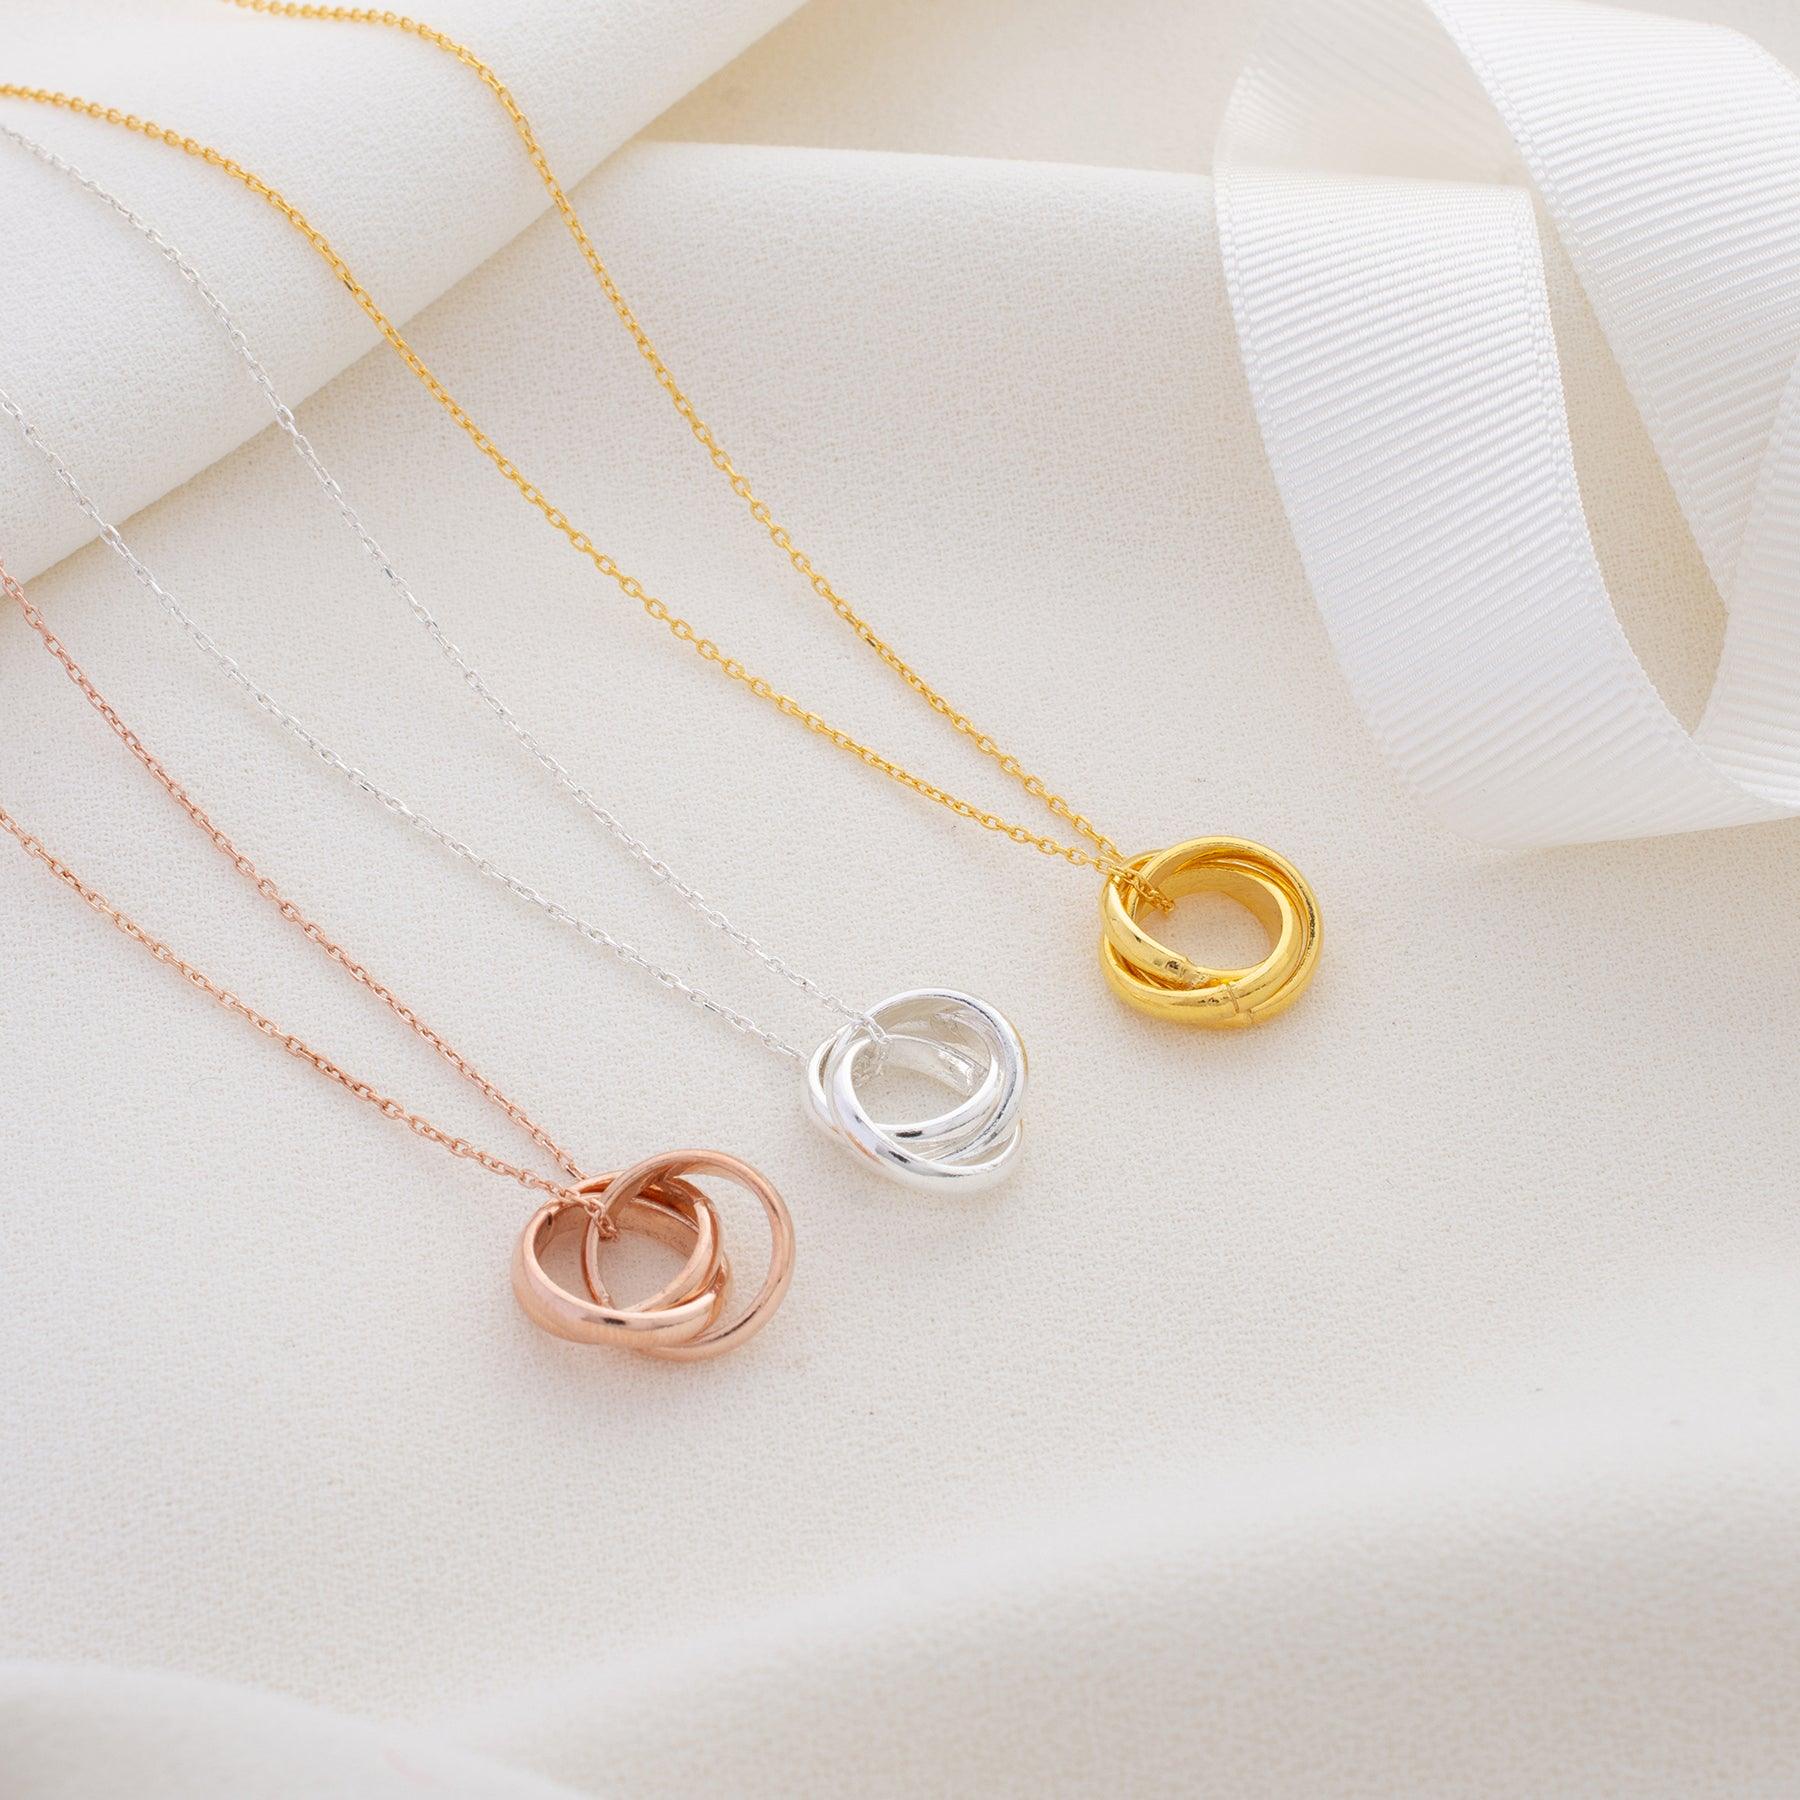 Interlocking Circles Necklace • Russian Ring Necklace • Gift For Her - Trending Silver Gifts